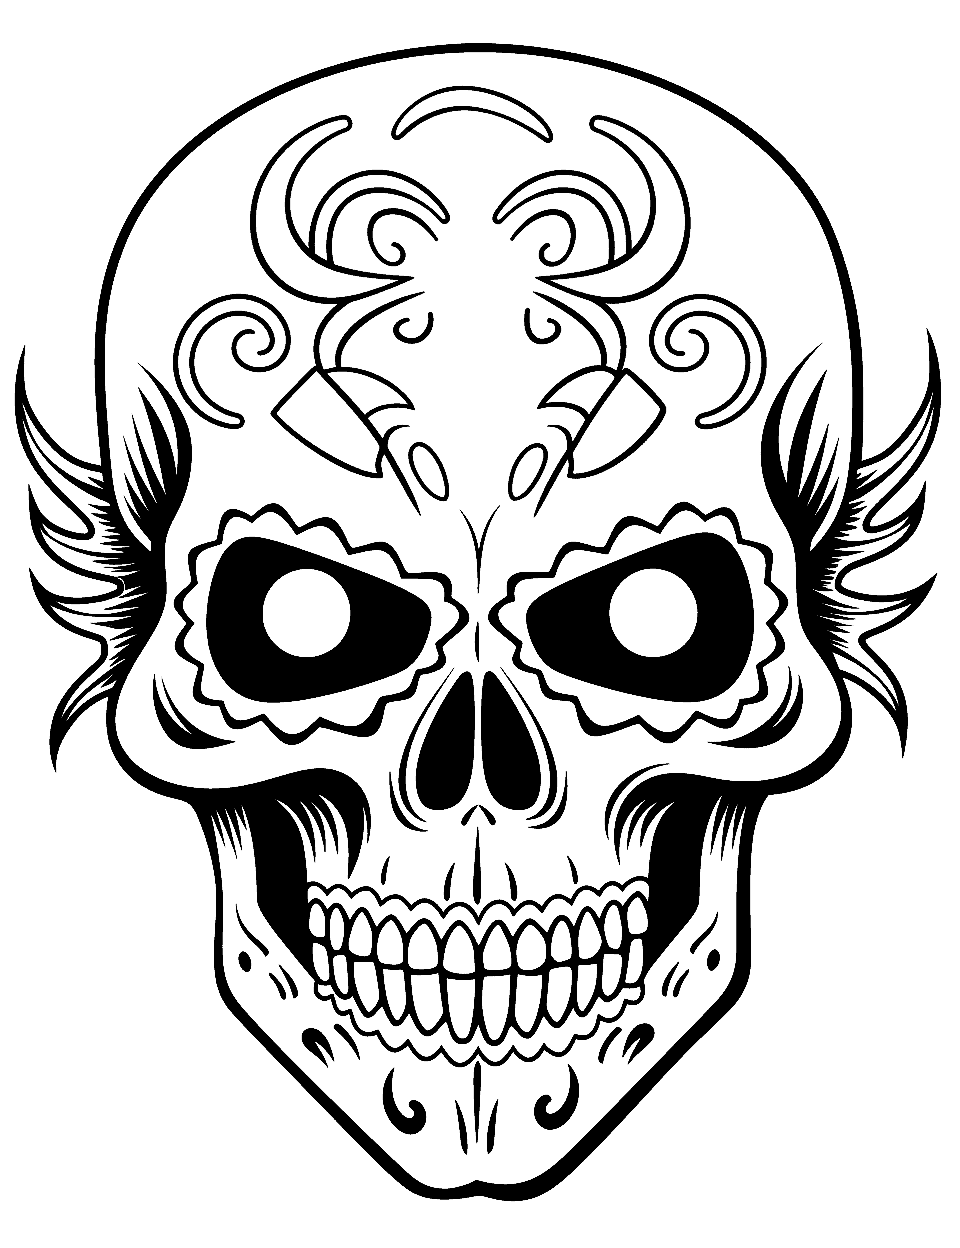 Graffiti Style Skull Coloring Page - A skull rendered in graffiti and patterns.